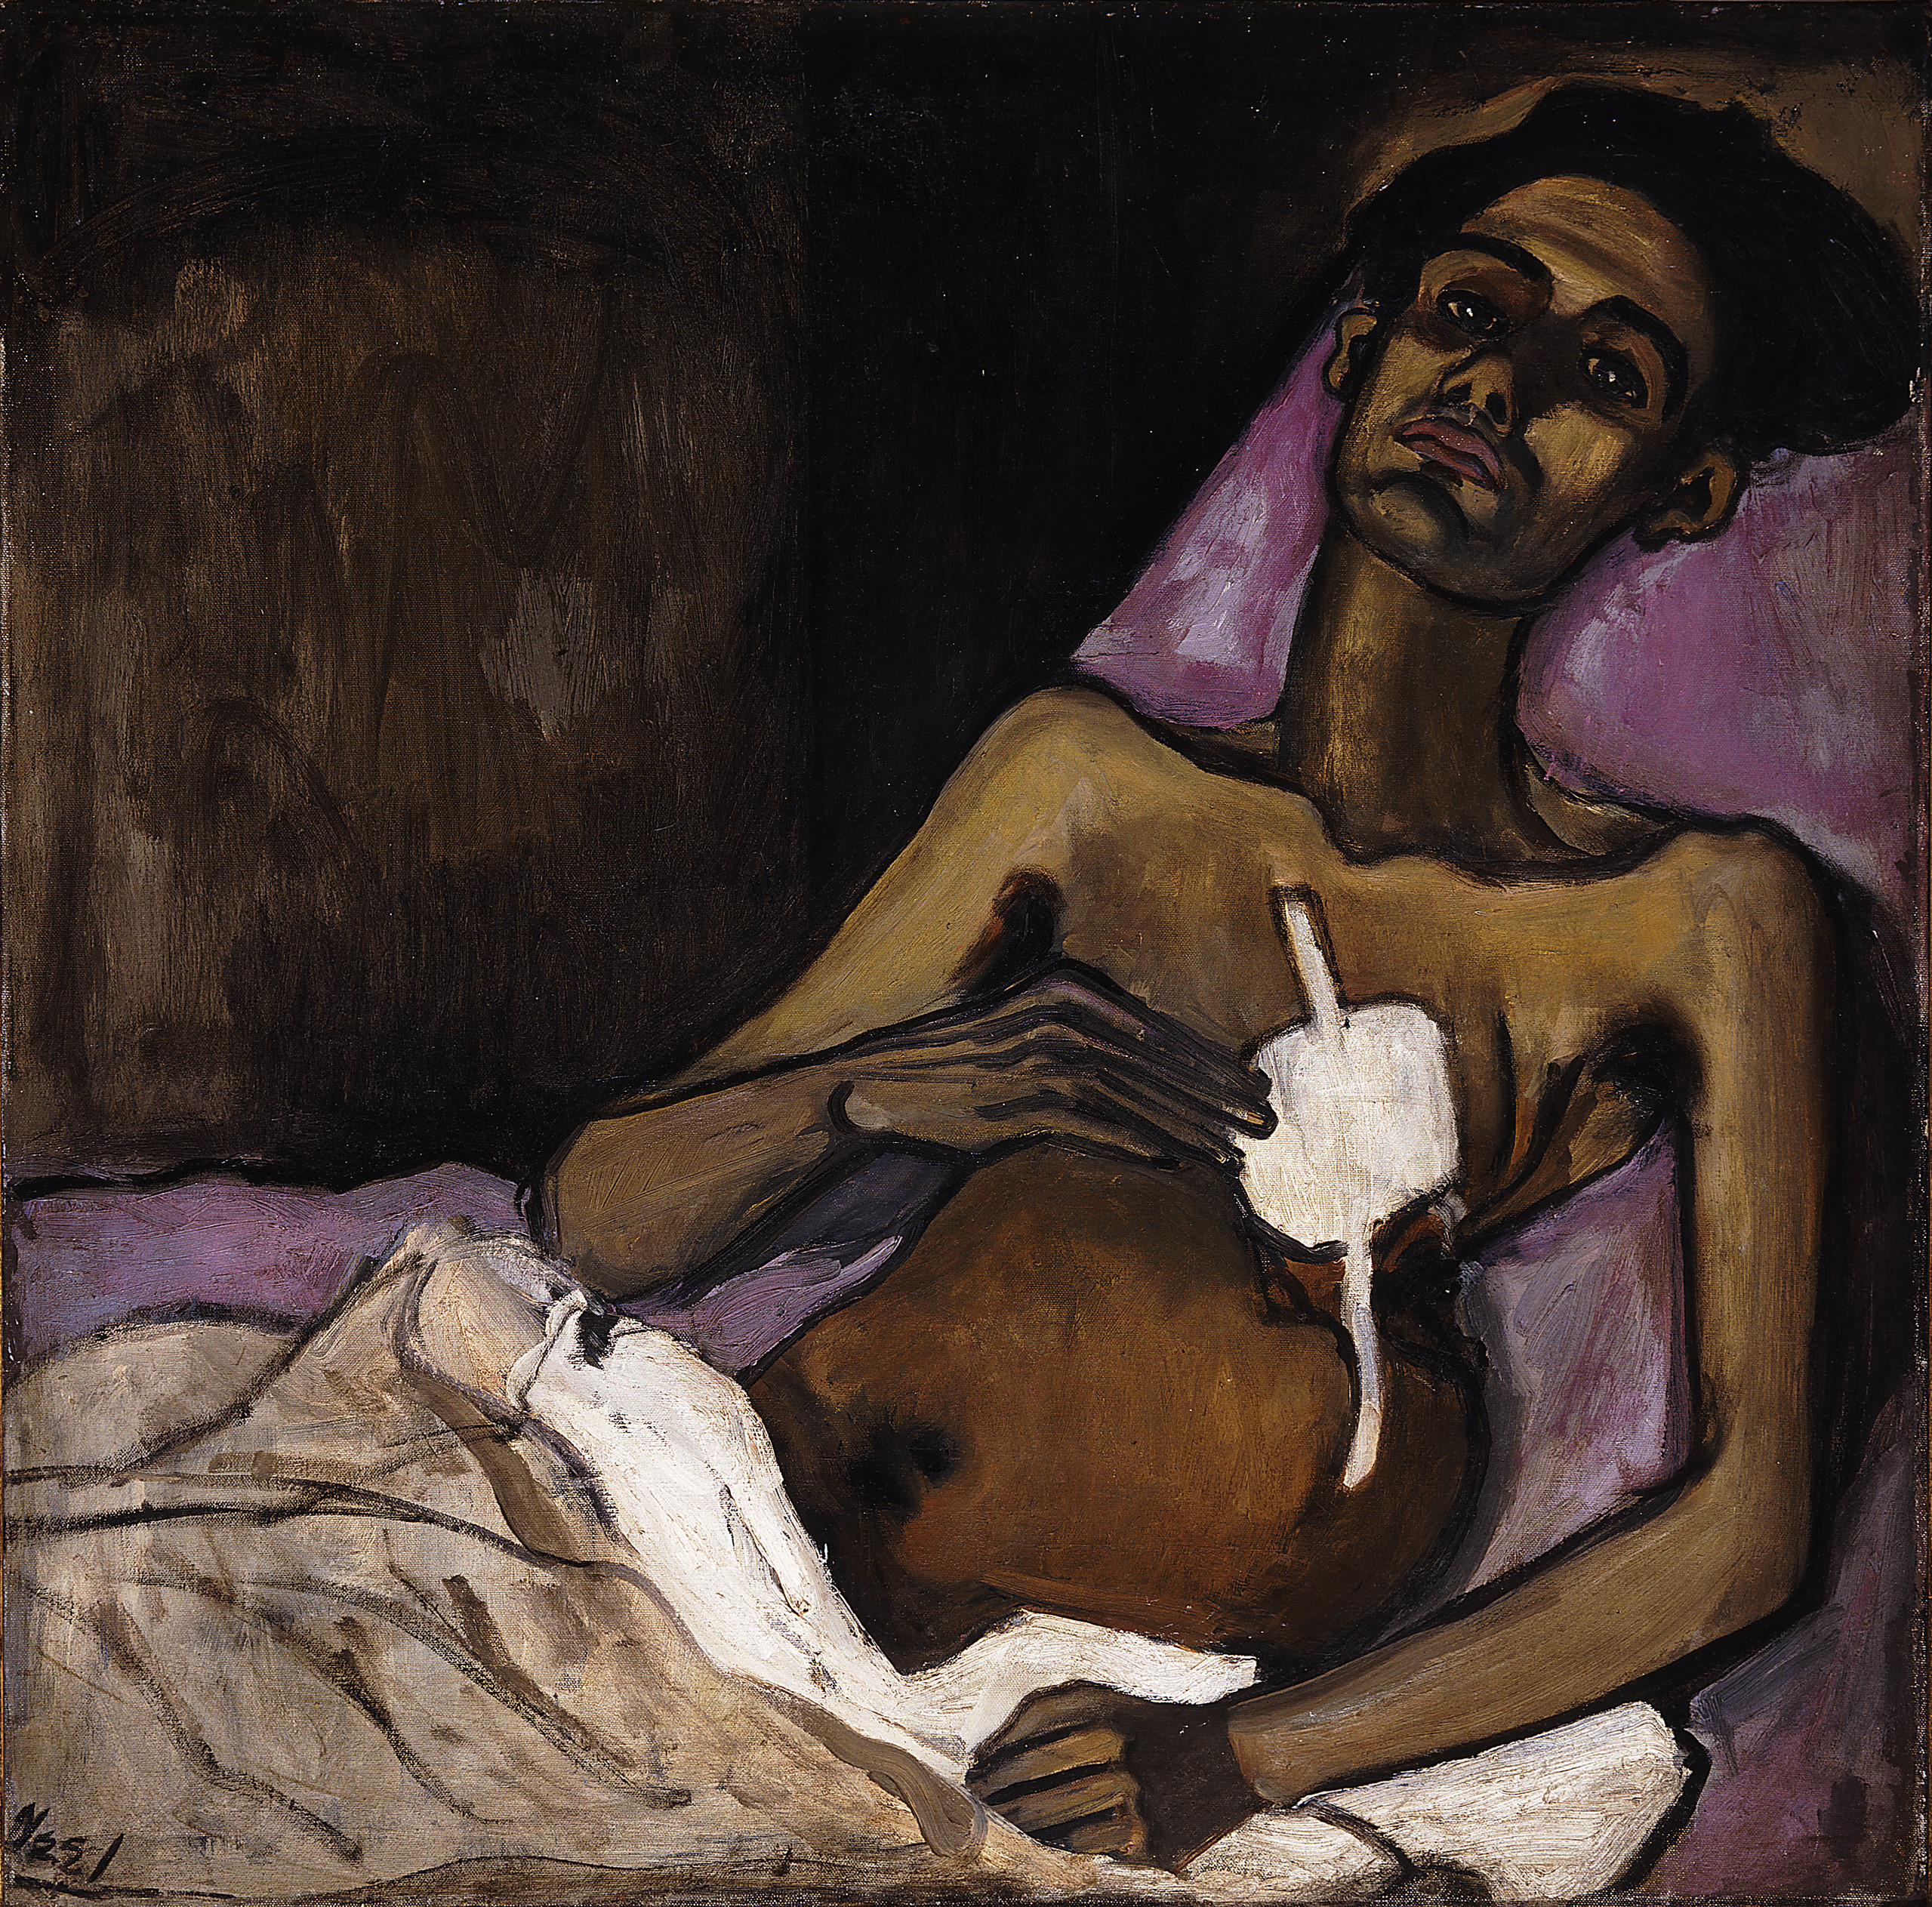 A sick man with medium skin tone lies on a bed with purple bedding and stares out with a dignified expression. The left side of his chest is misshapen and covered with a white bandage. Thick outlines define his body and highlights on his arms and face accentuate his frail frame.